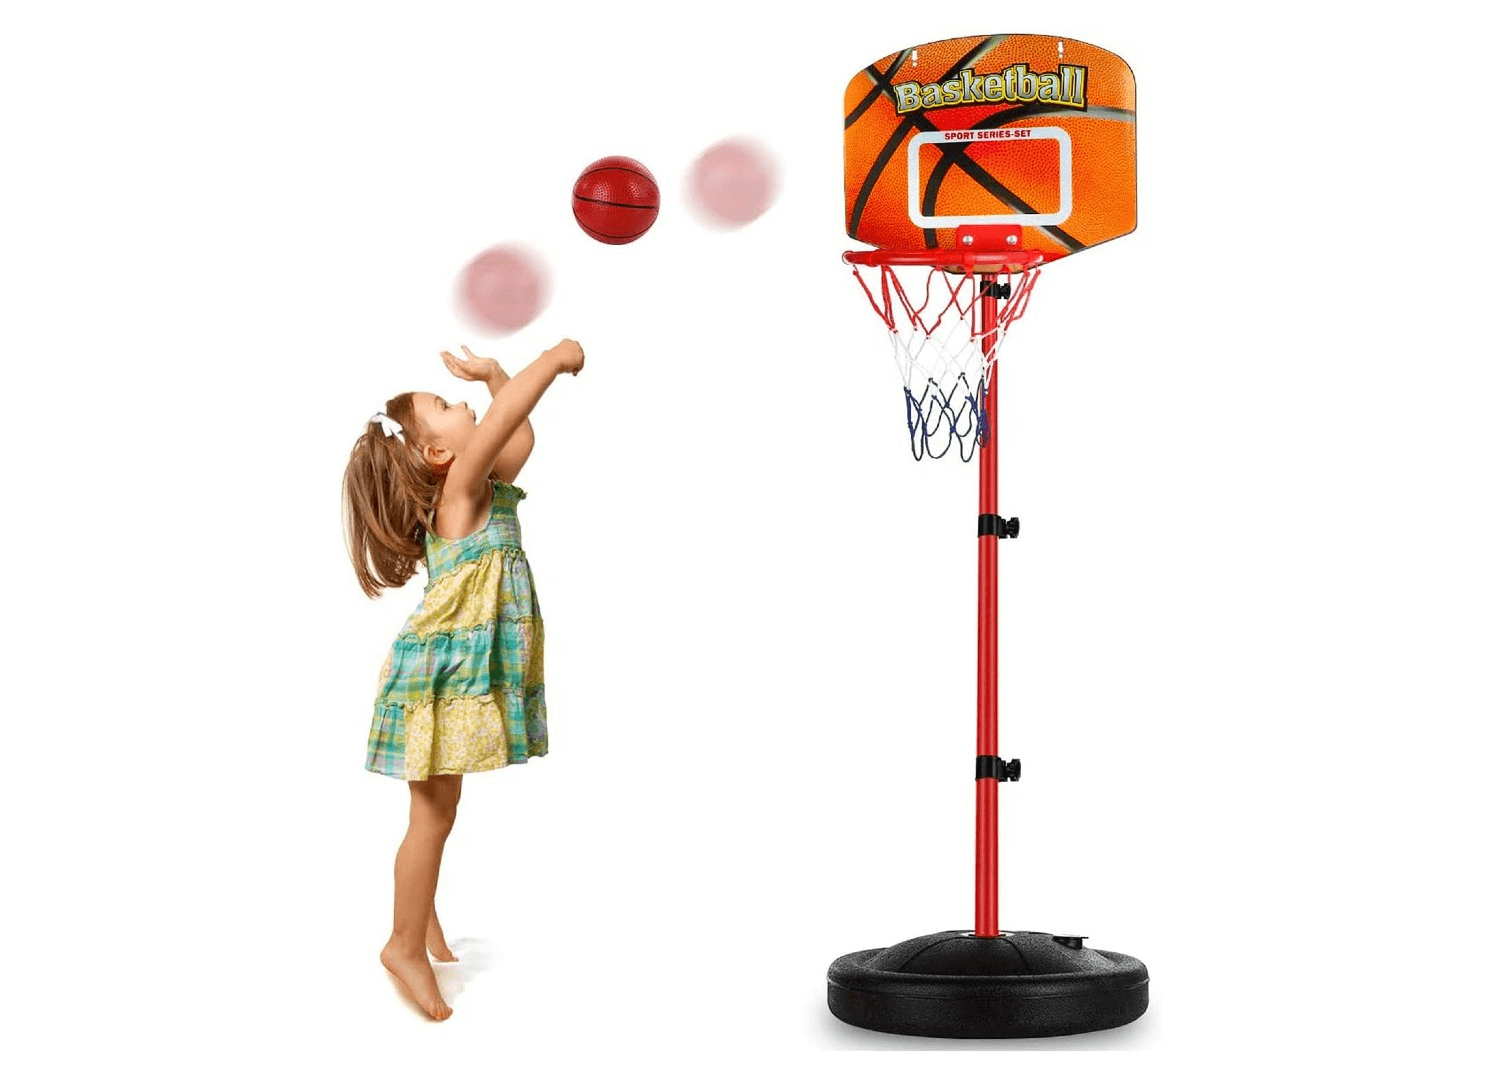 Portable hoops with adjustable heights will be more convenient